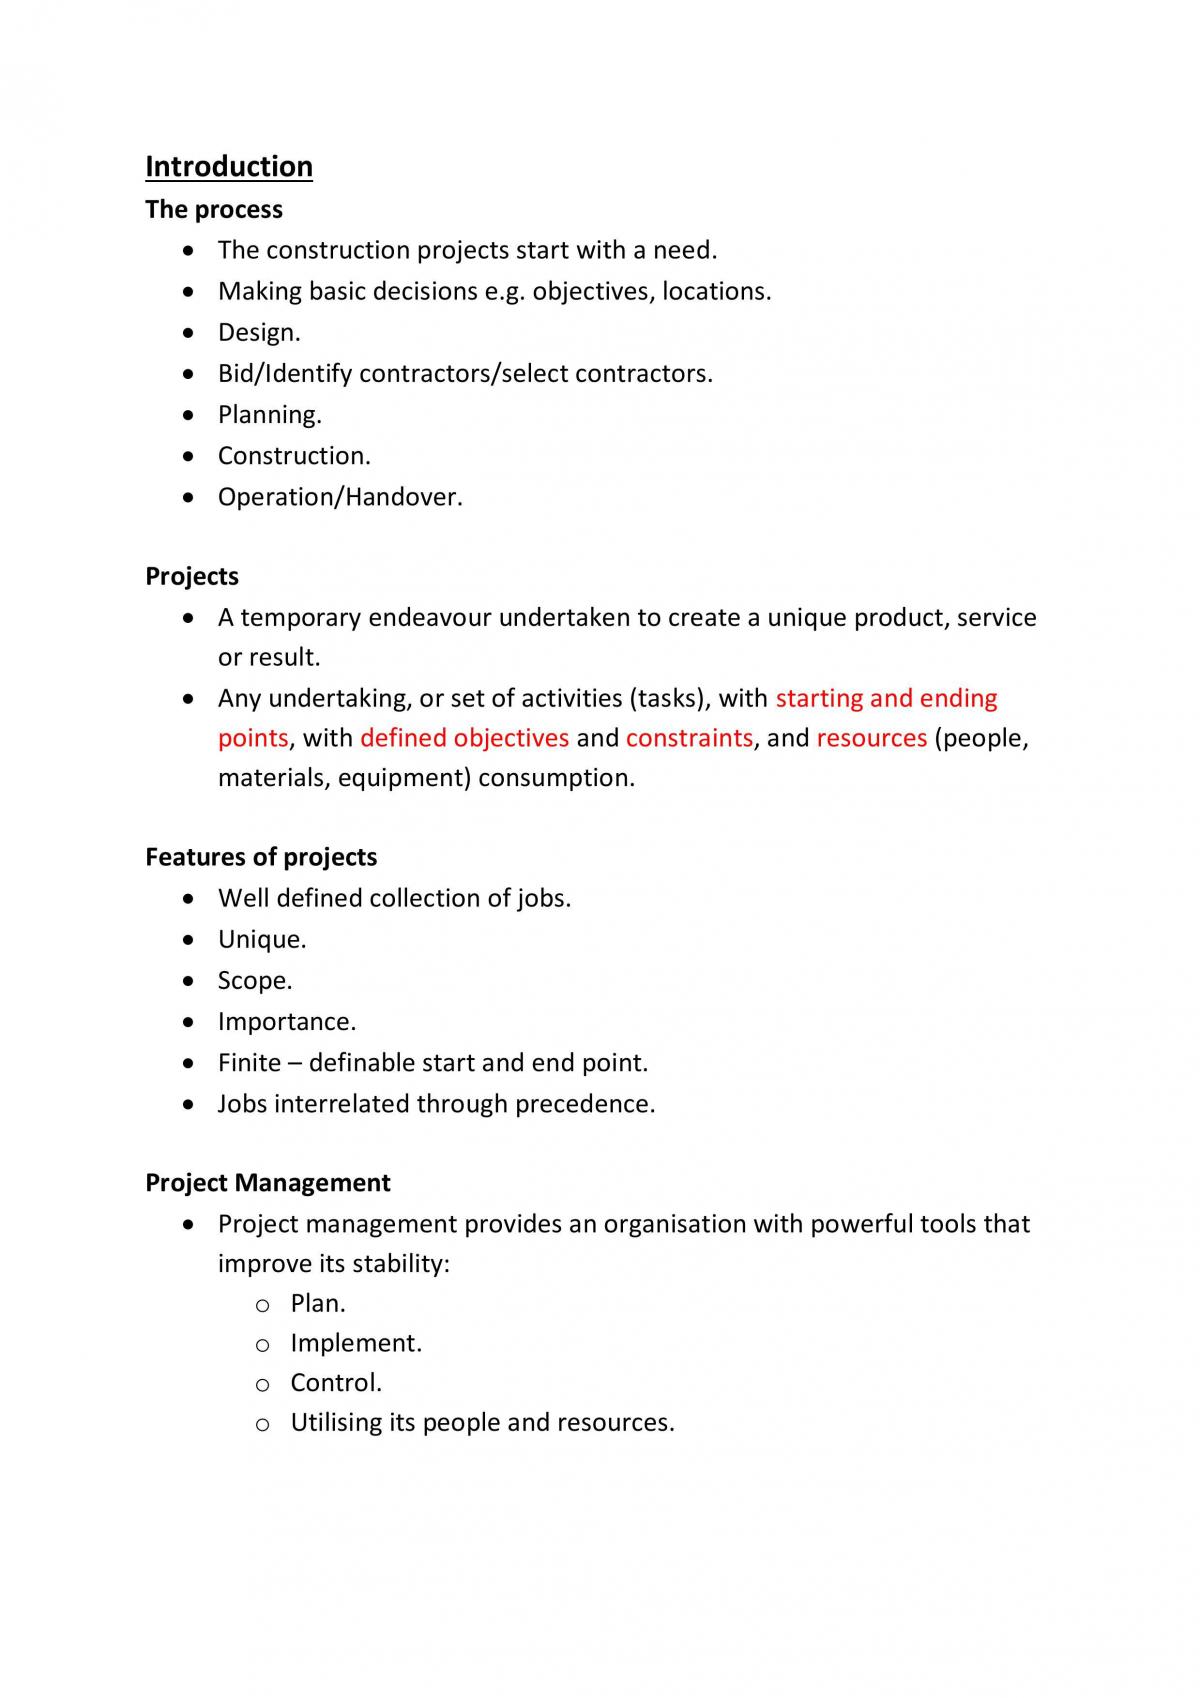 Complete notes for Surveying - Page 1